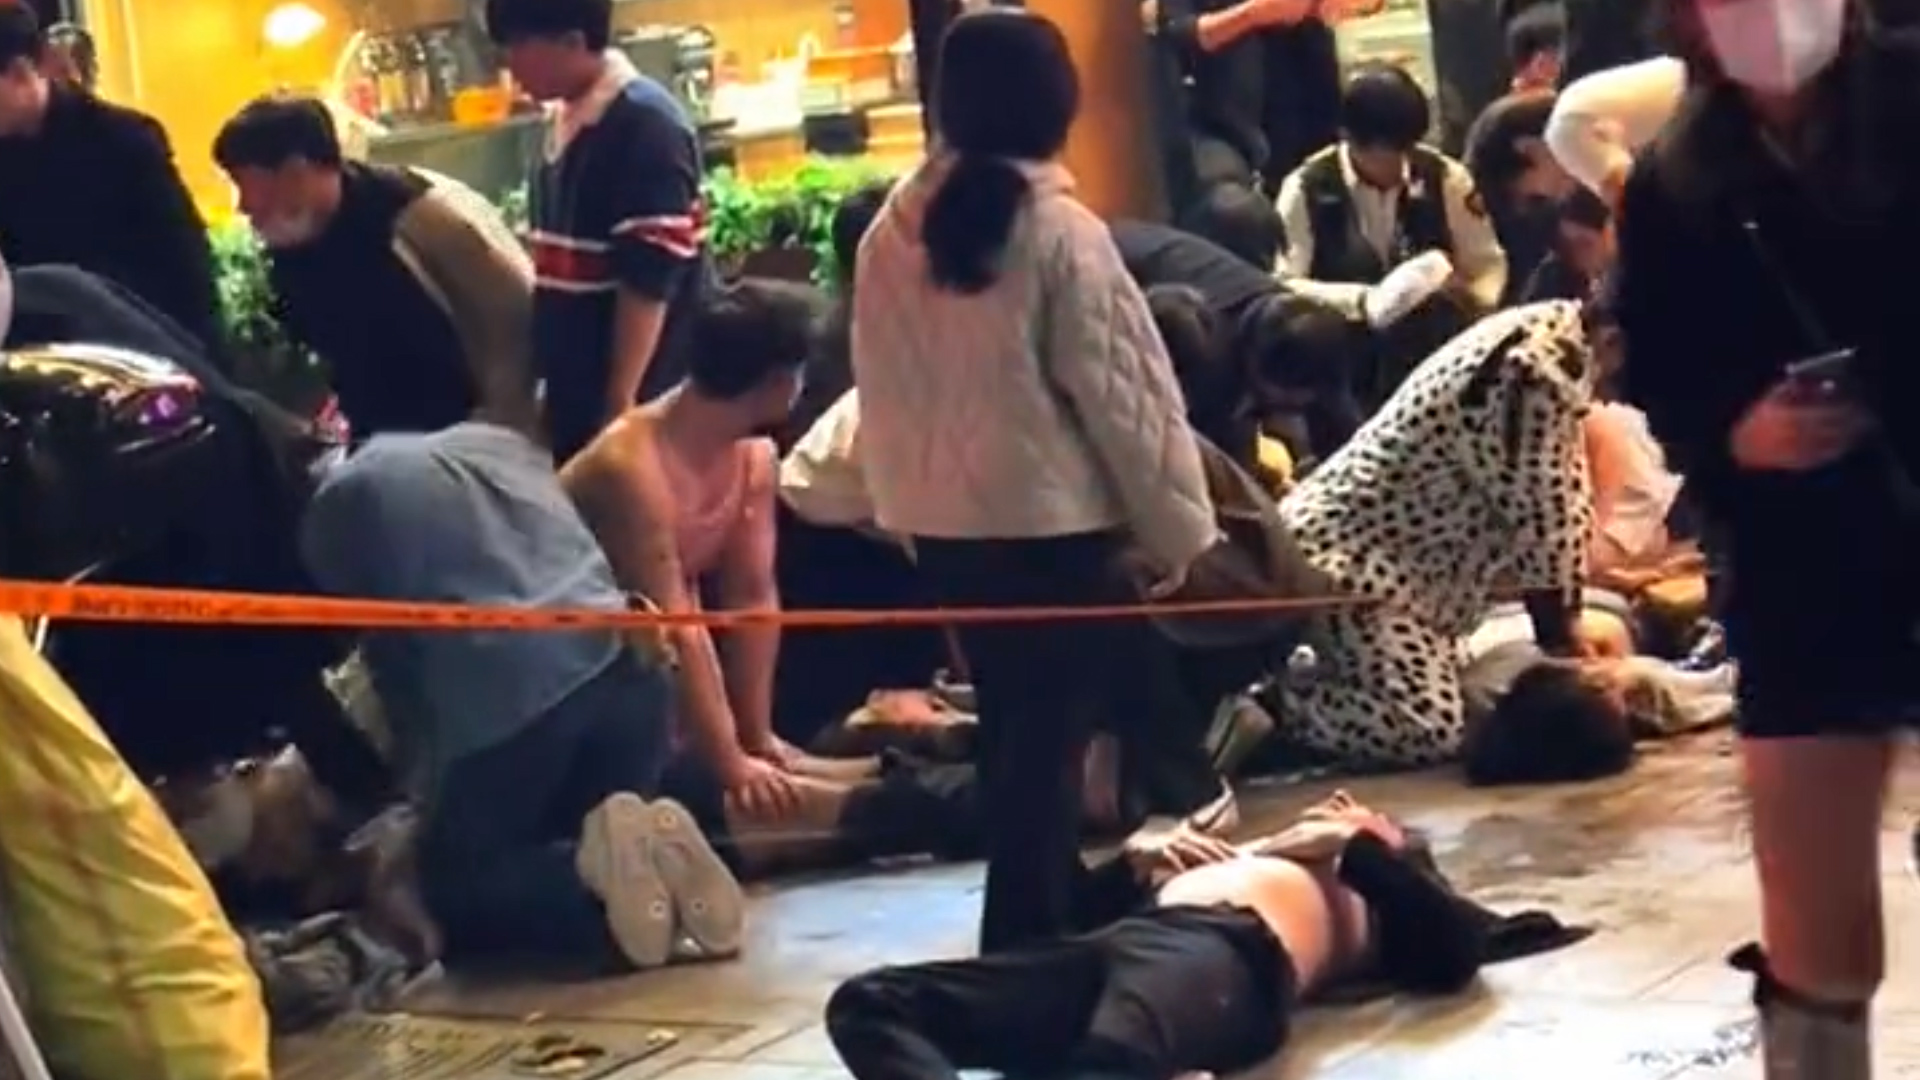 People perform CPR on victims on the streets 